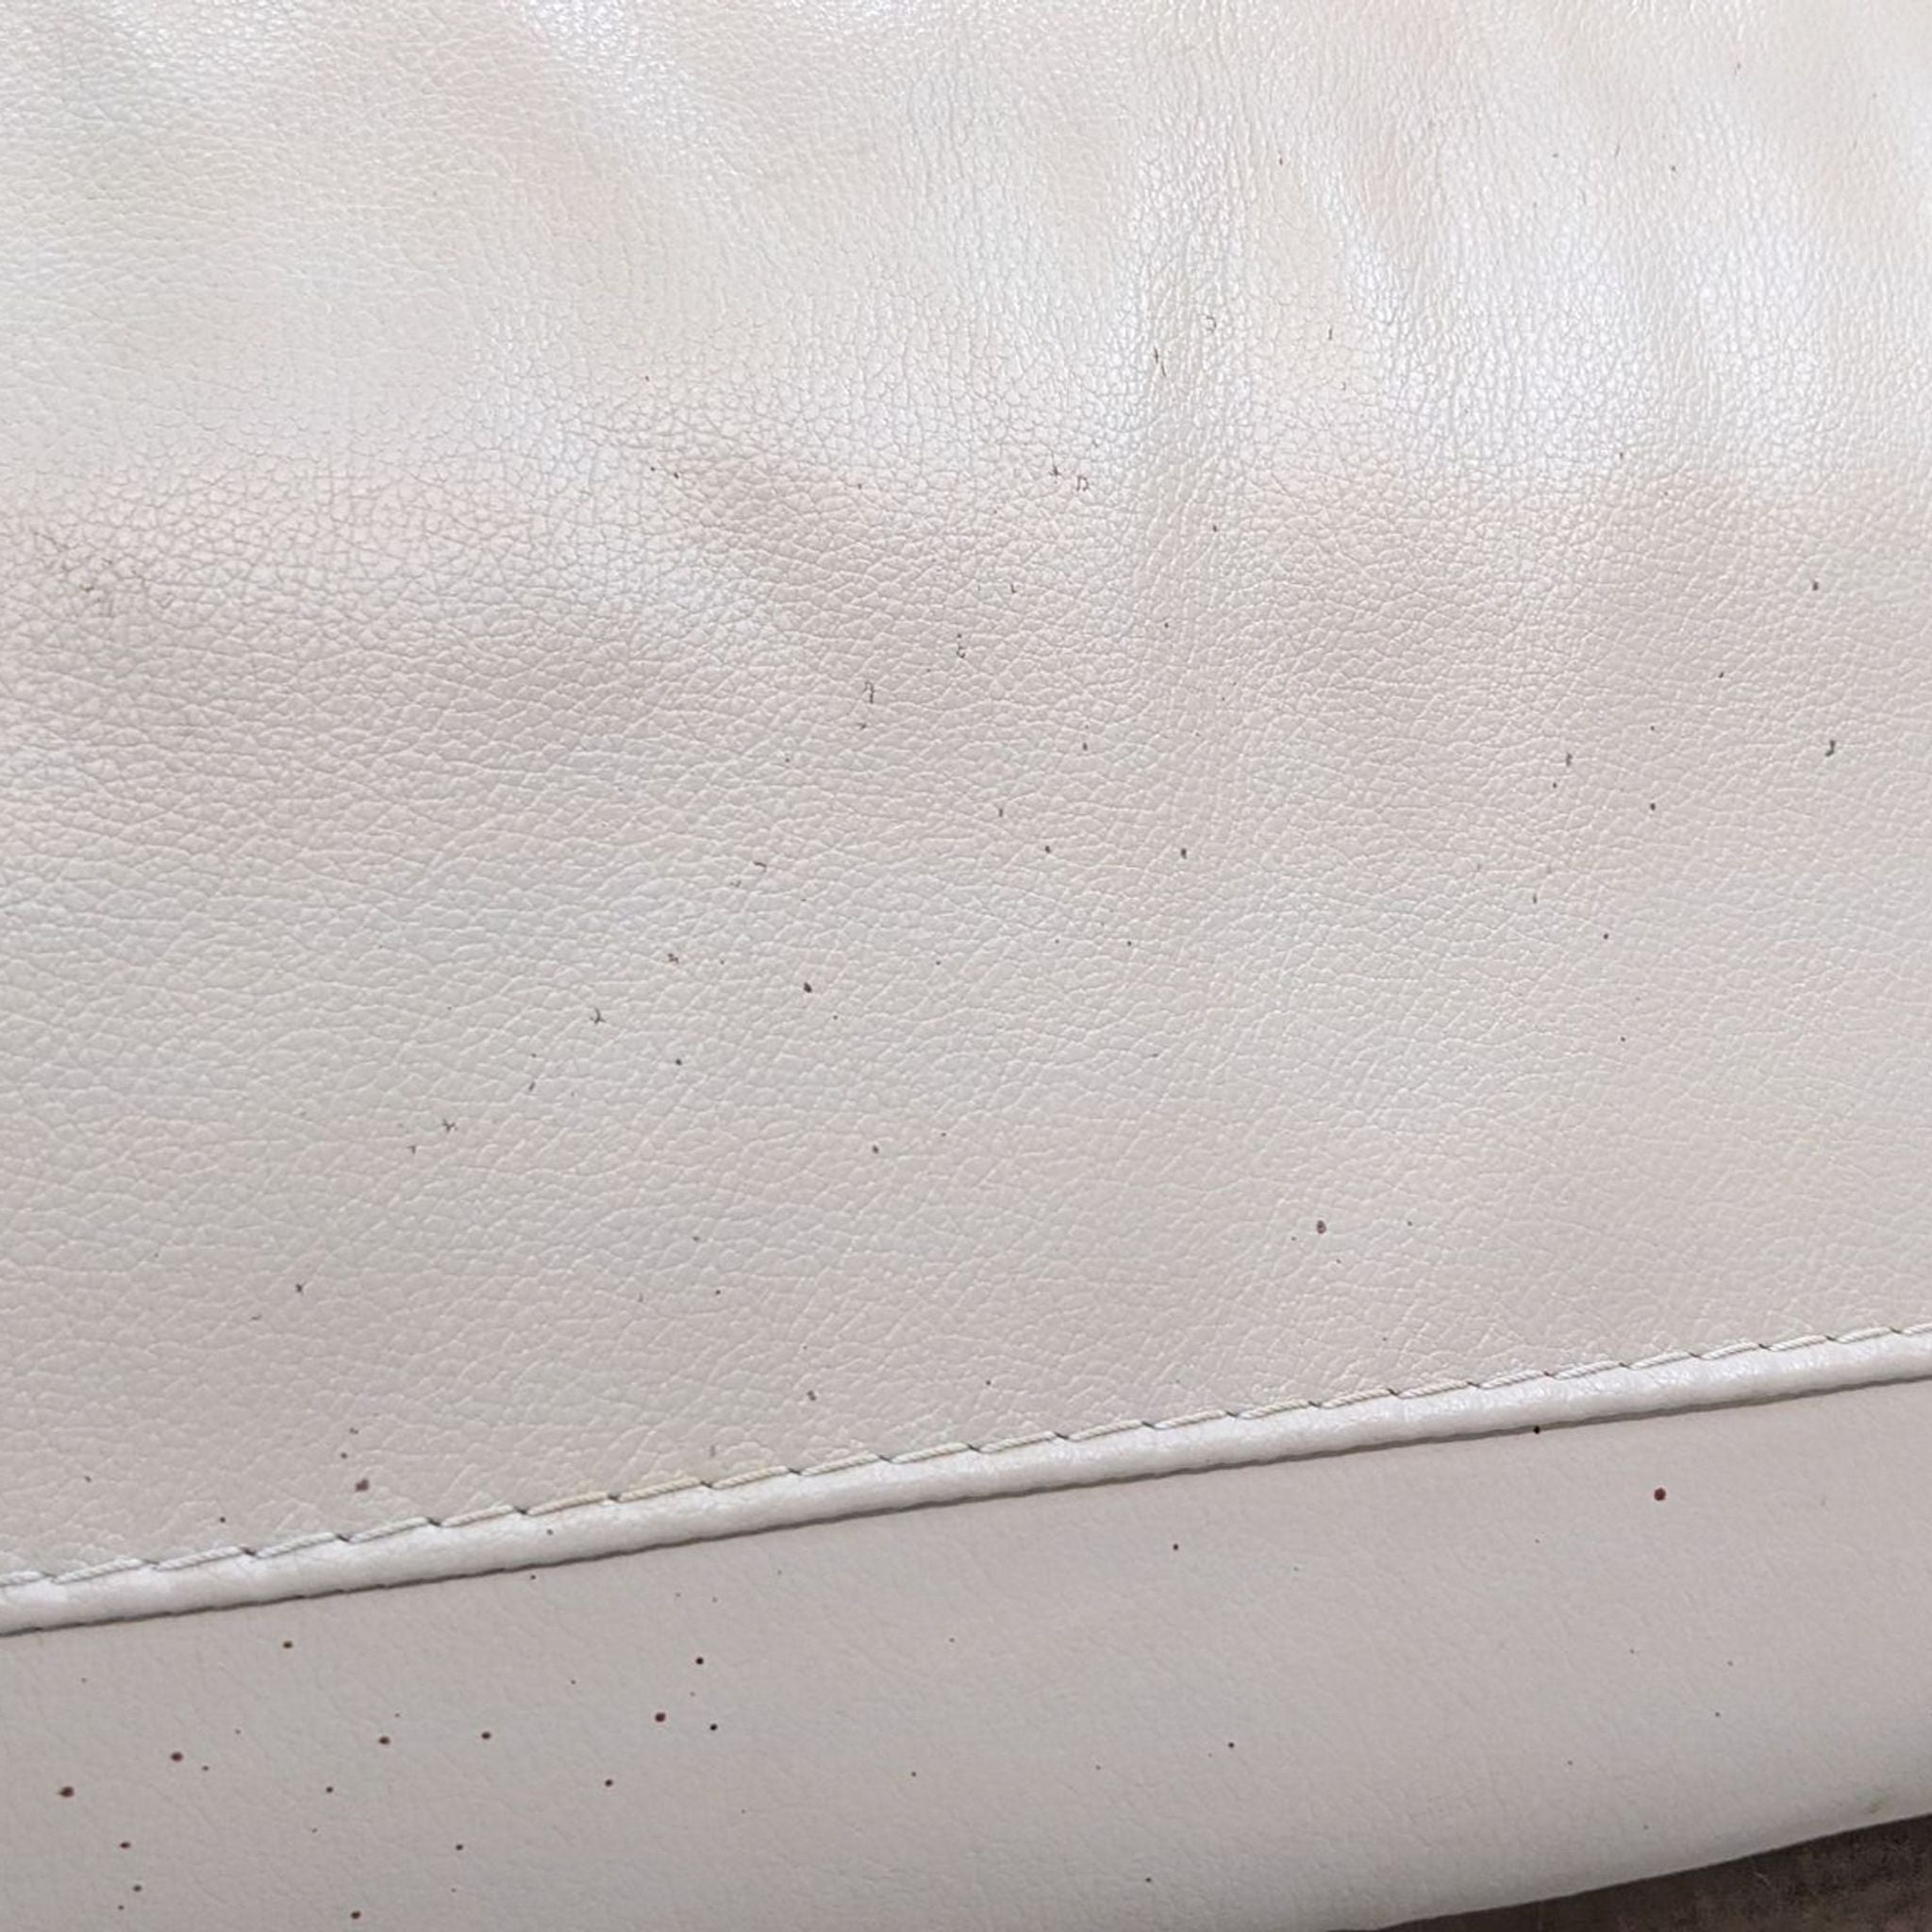 Close-up of a cream-colored tufted leather sofa texture with stitching detail.